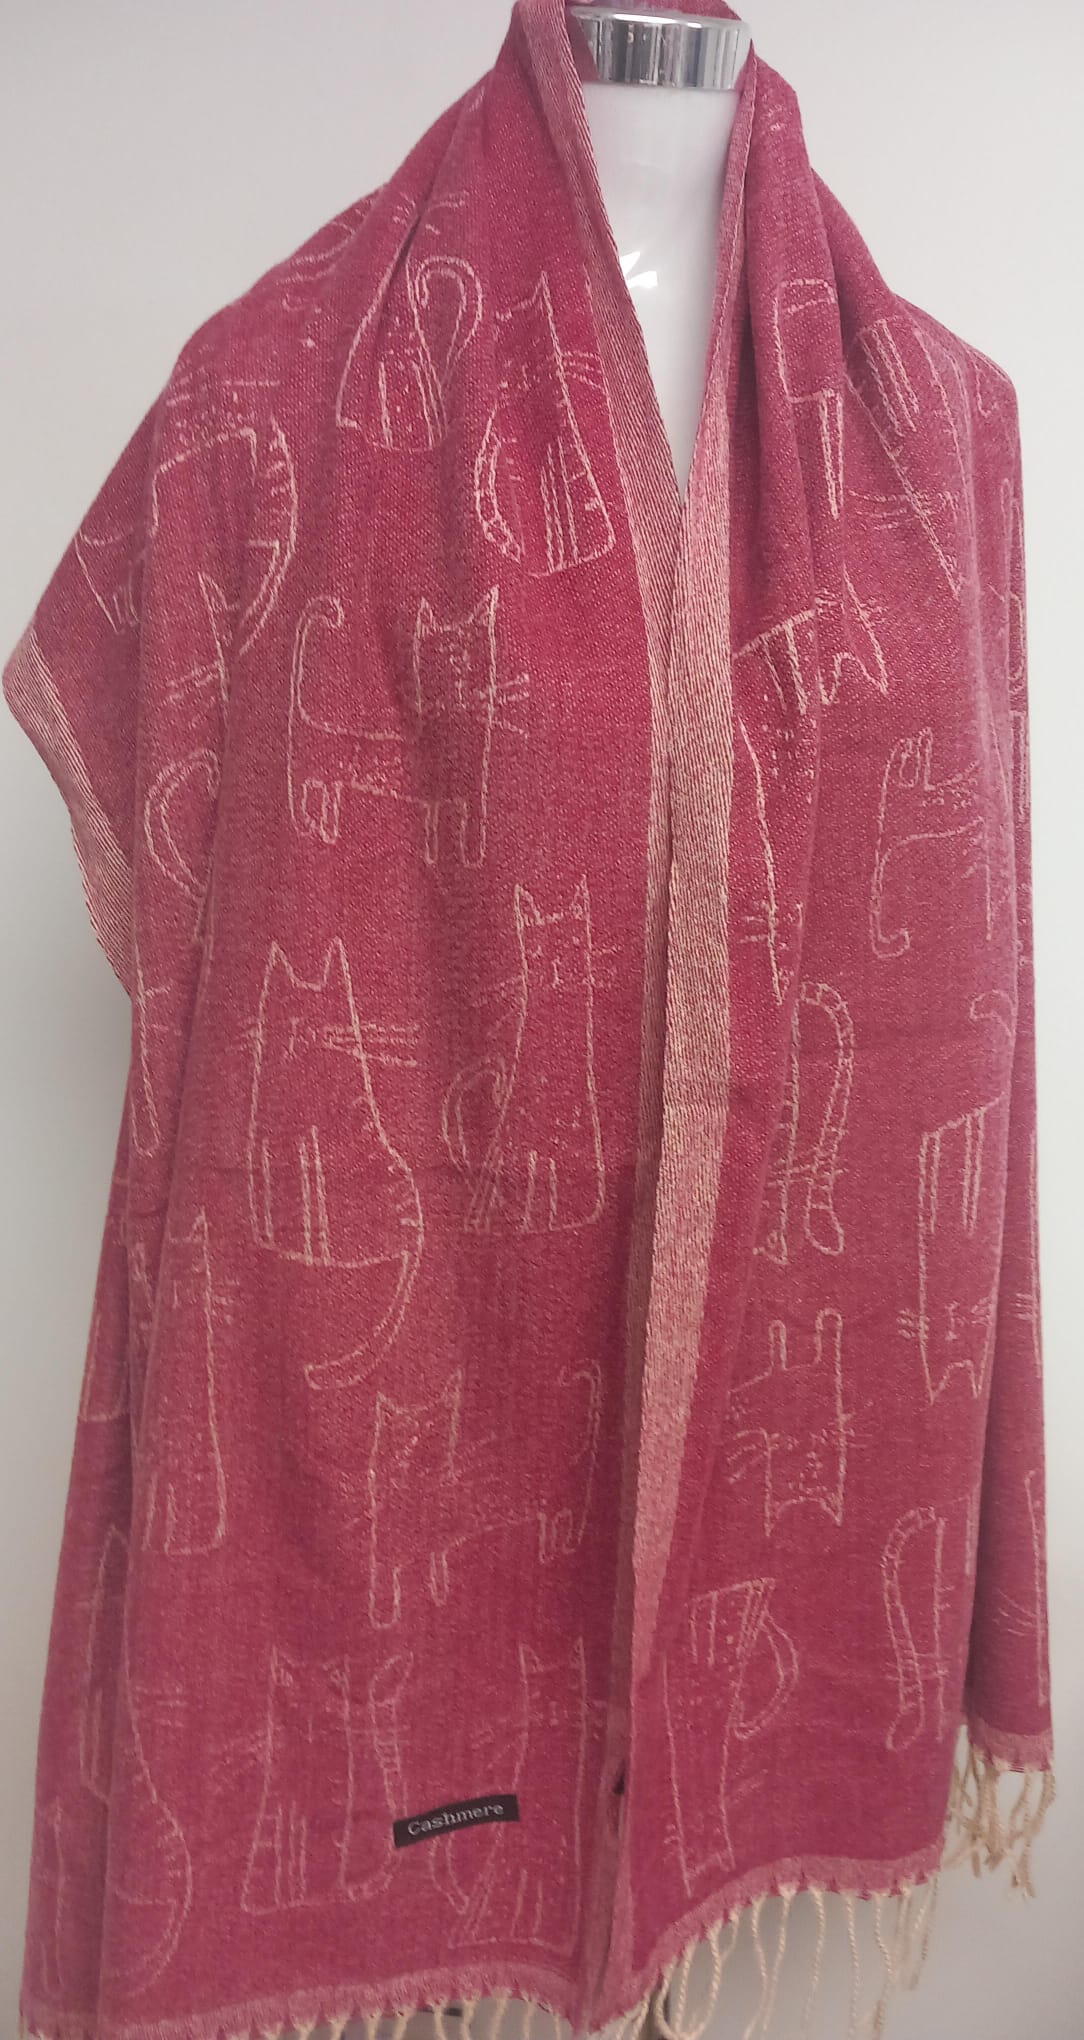 Reversible cats scarf in maroon red wine and beige